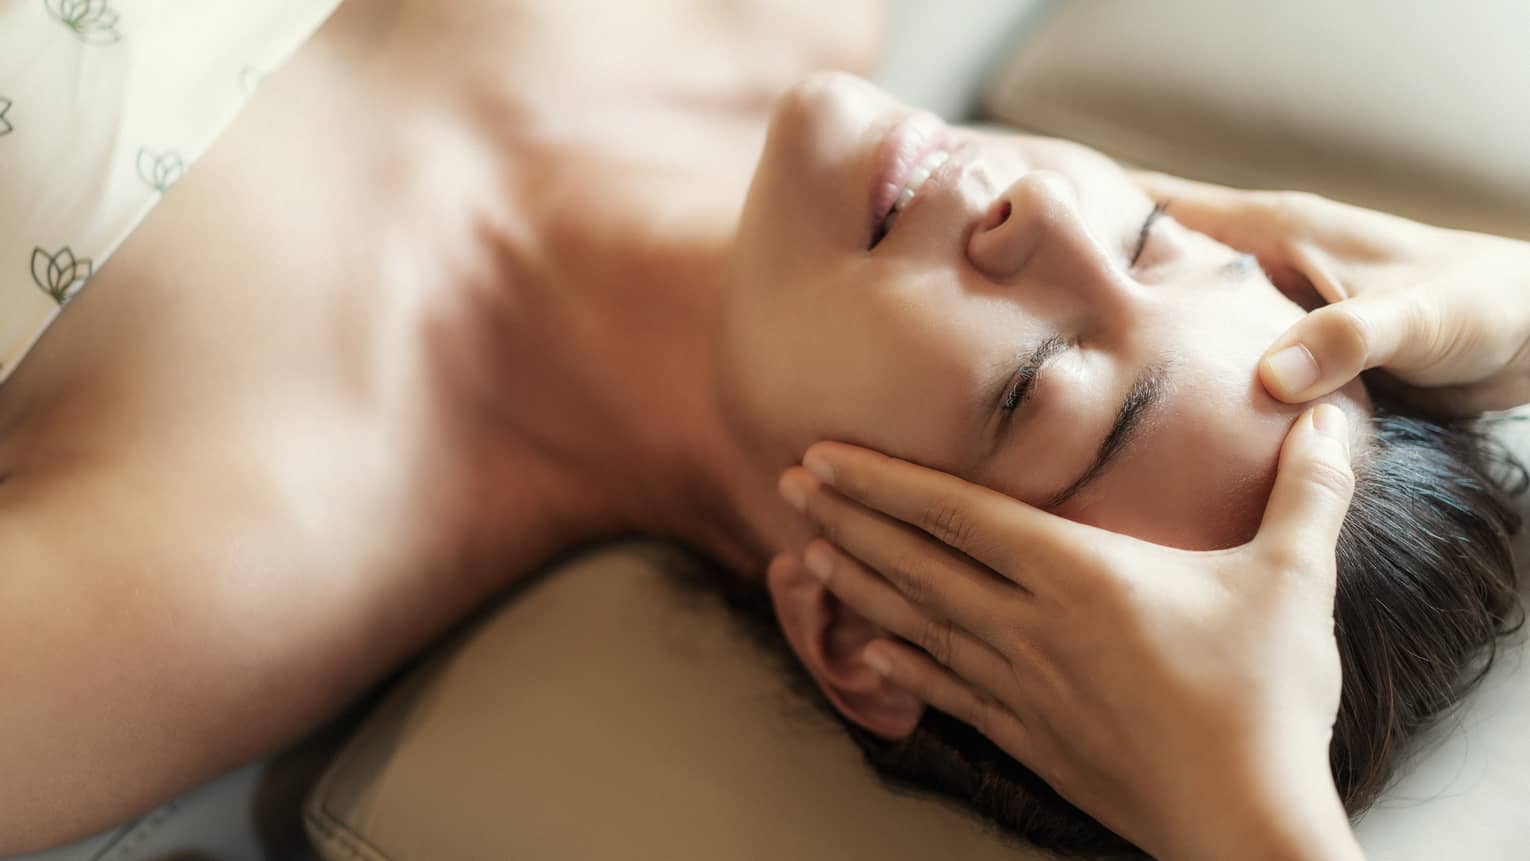 Spa facial, two hands rest on woman's forehead as she closes her eyes, lays under sheet on treatment table